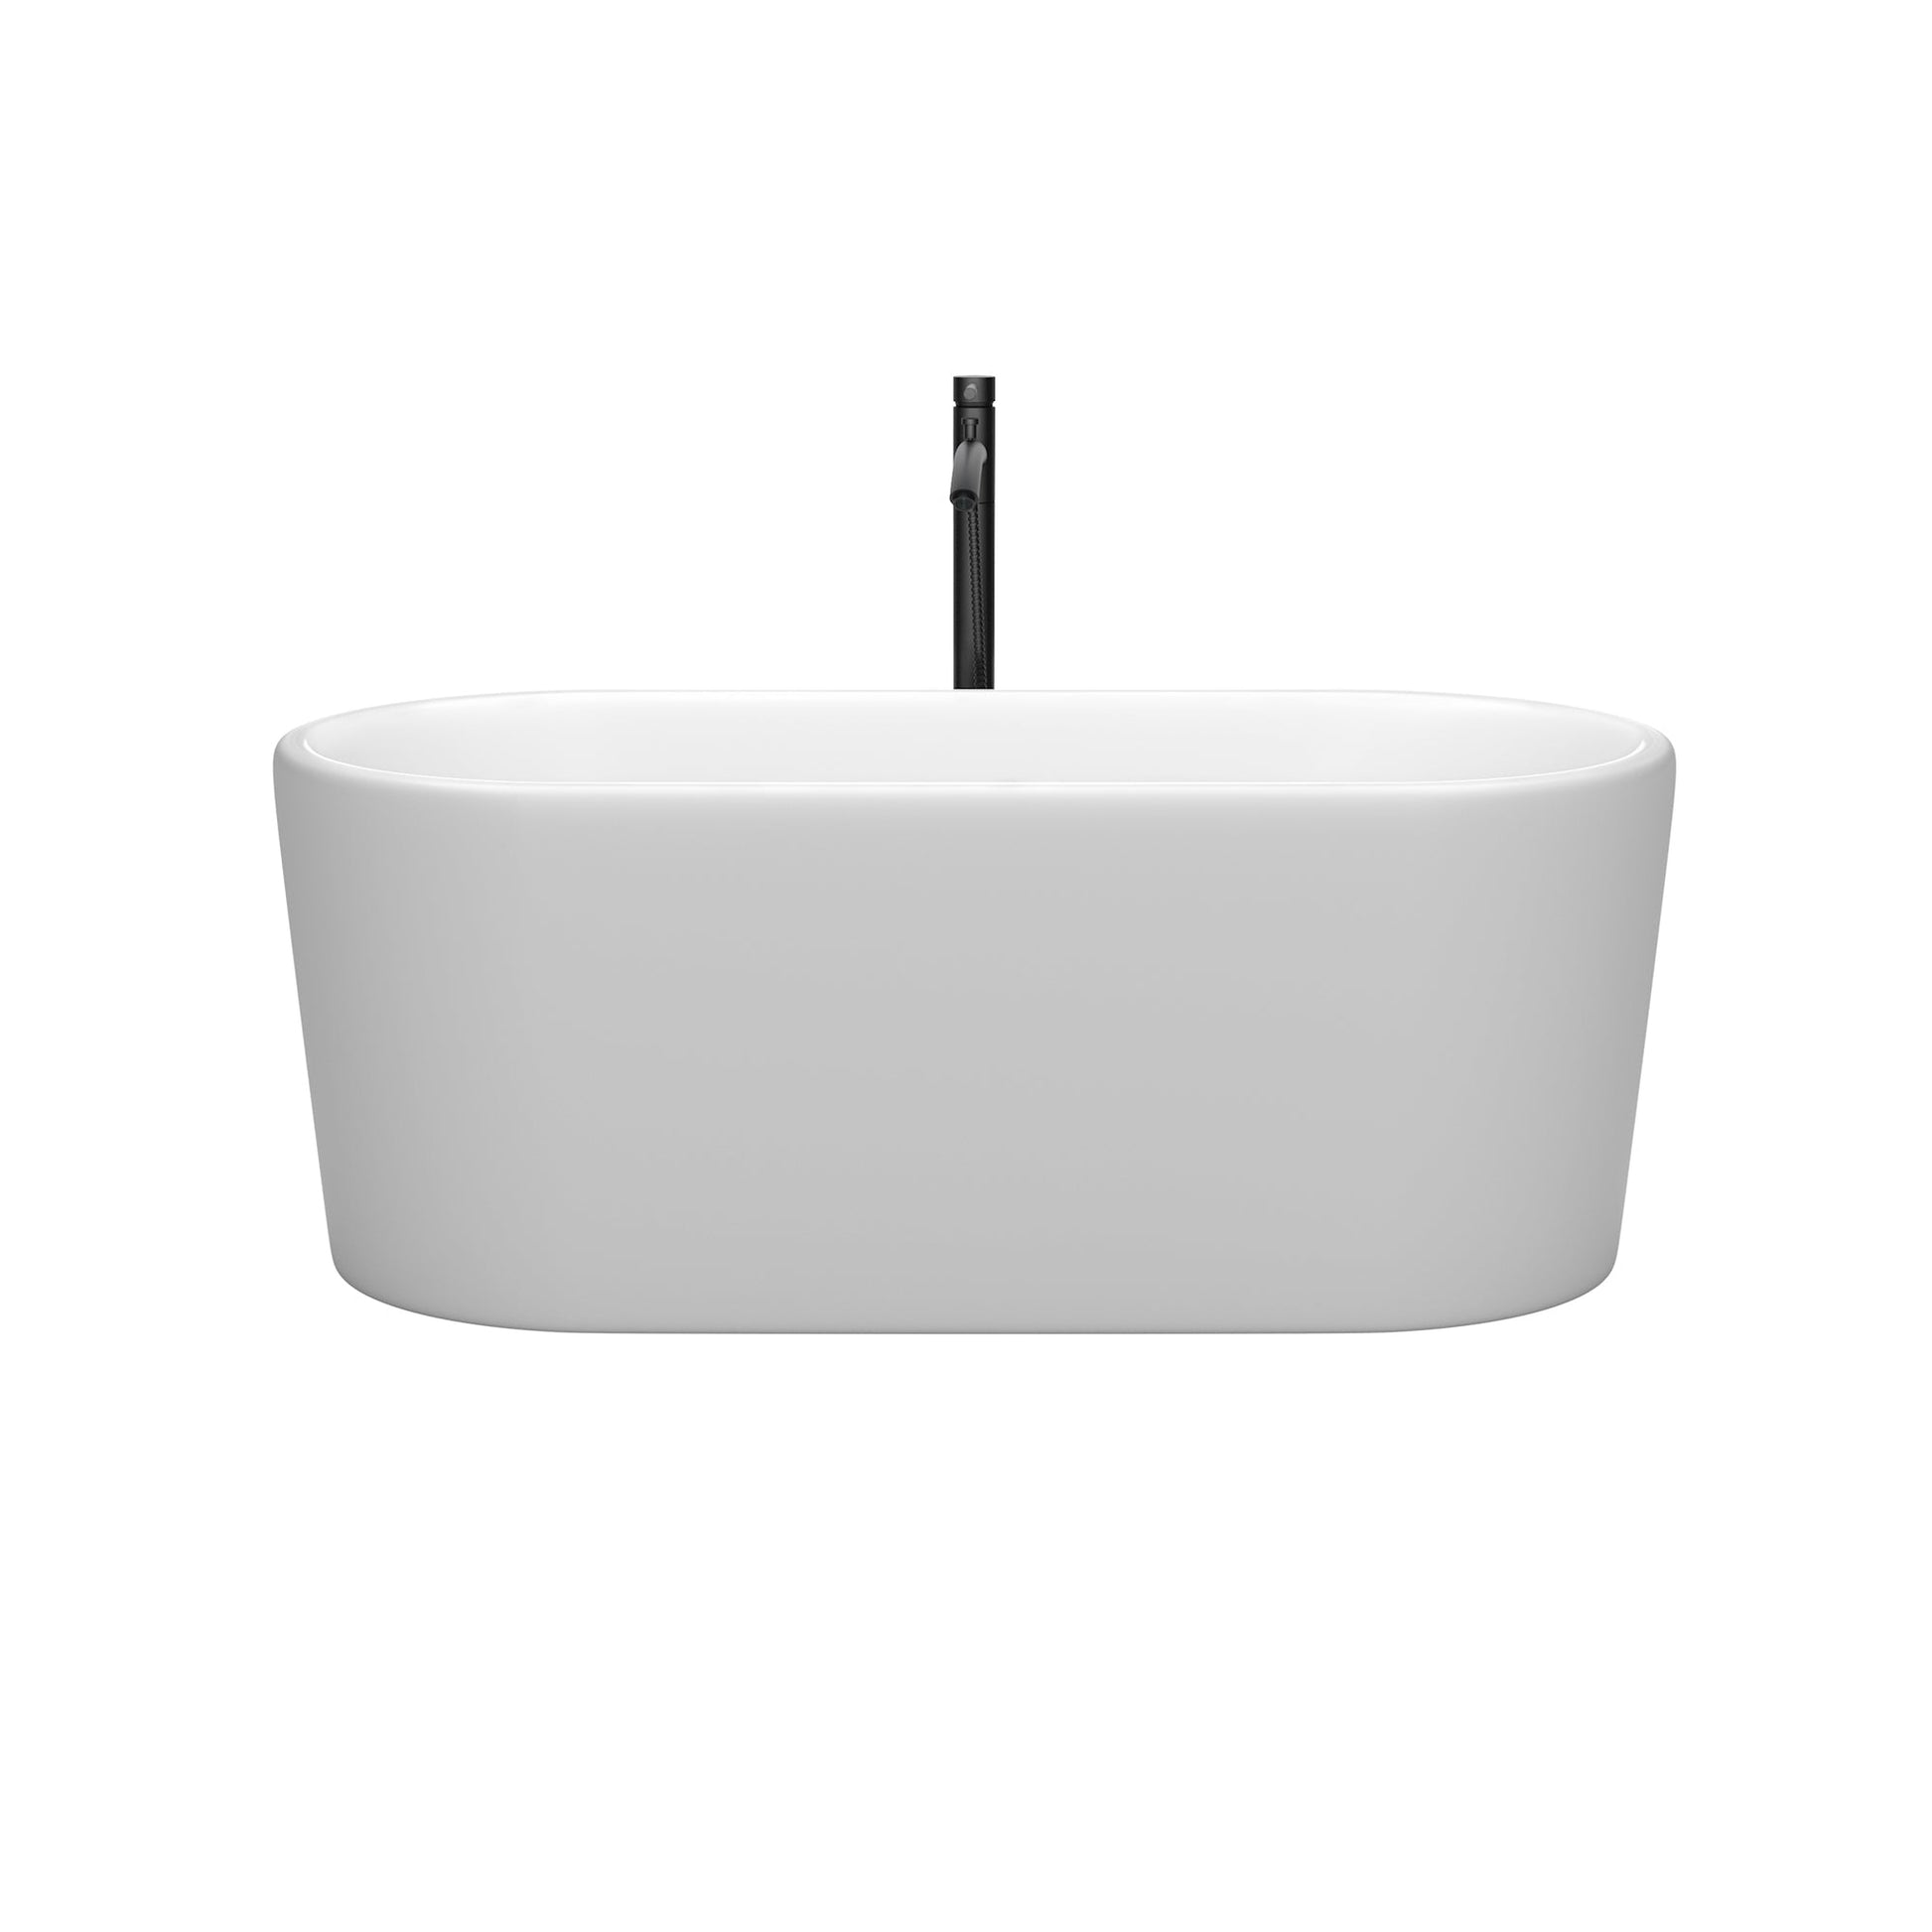 Wyndham Collection Ursula 59" Freestanding Bathtub in Matte White With Shiny White Trim and Floor Mounted Faucet in Matte Black